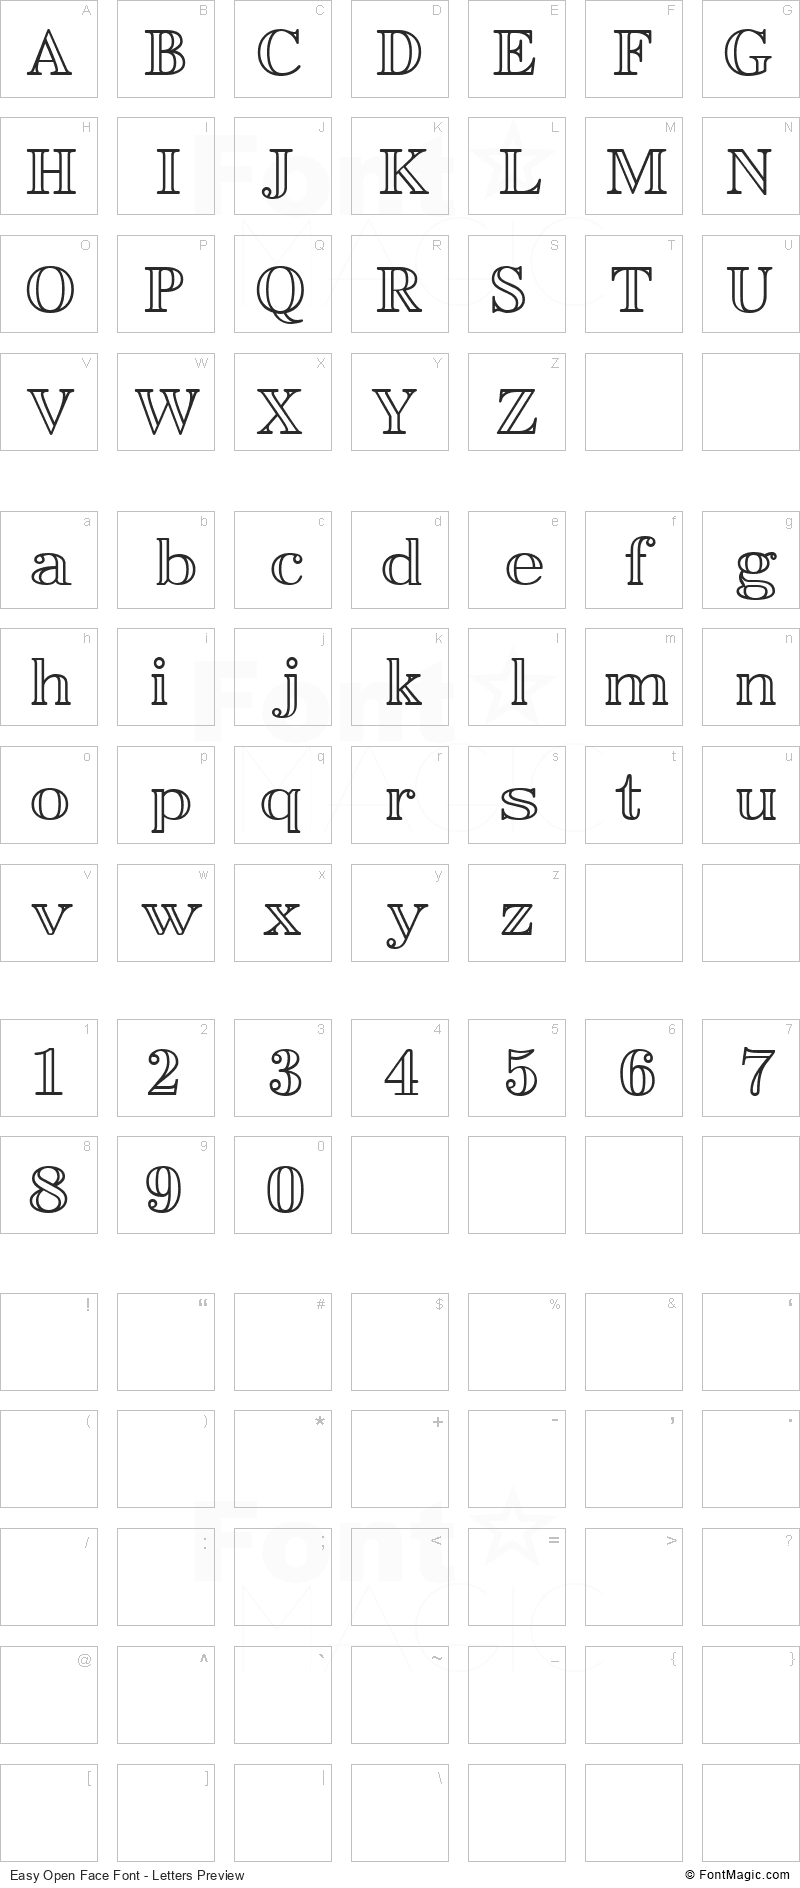 Easy Open Face Font - All Latters Preview Chart